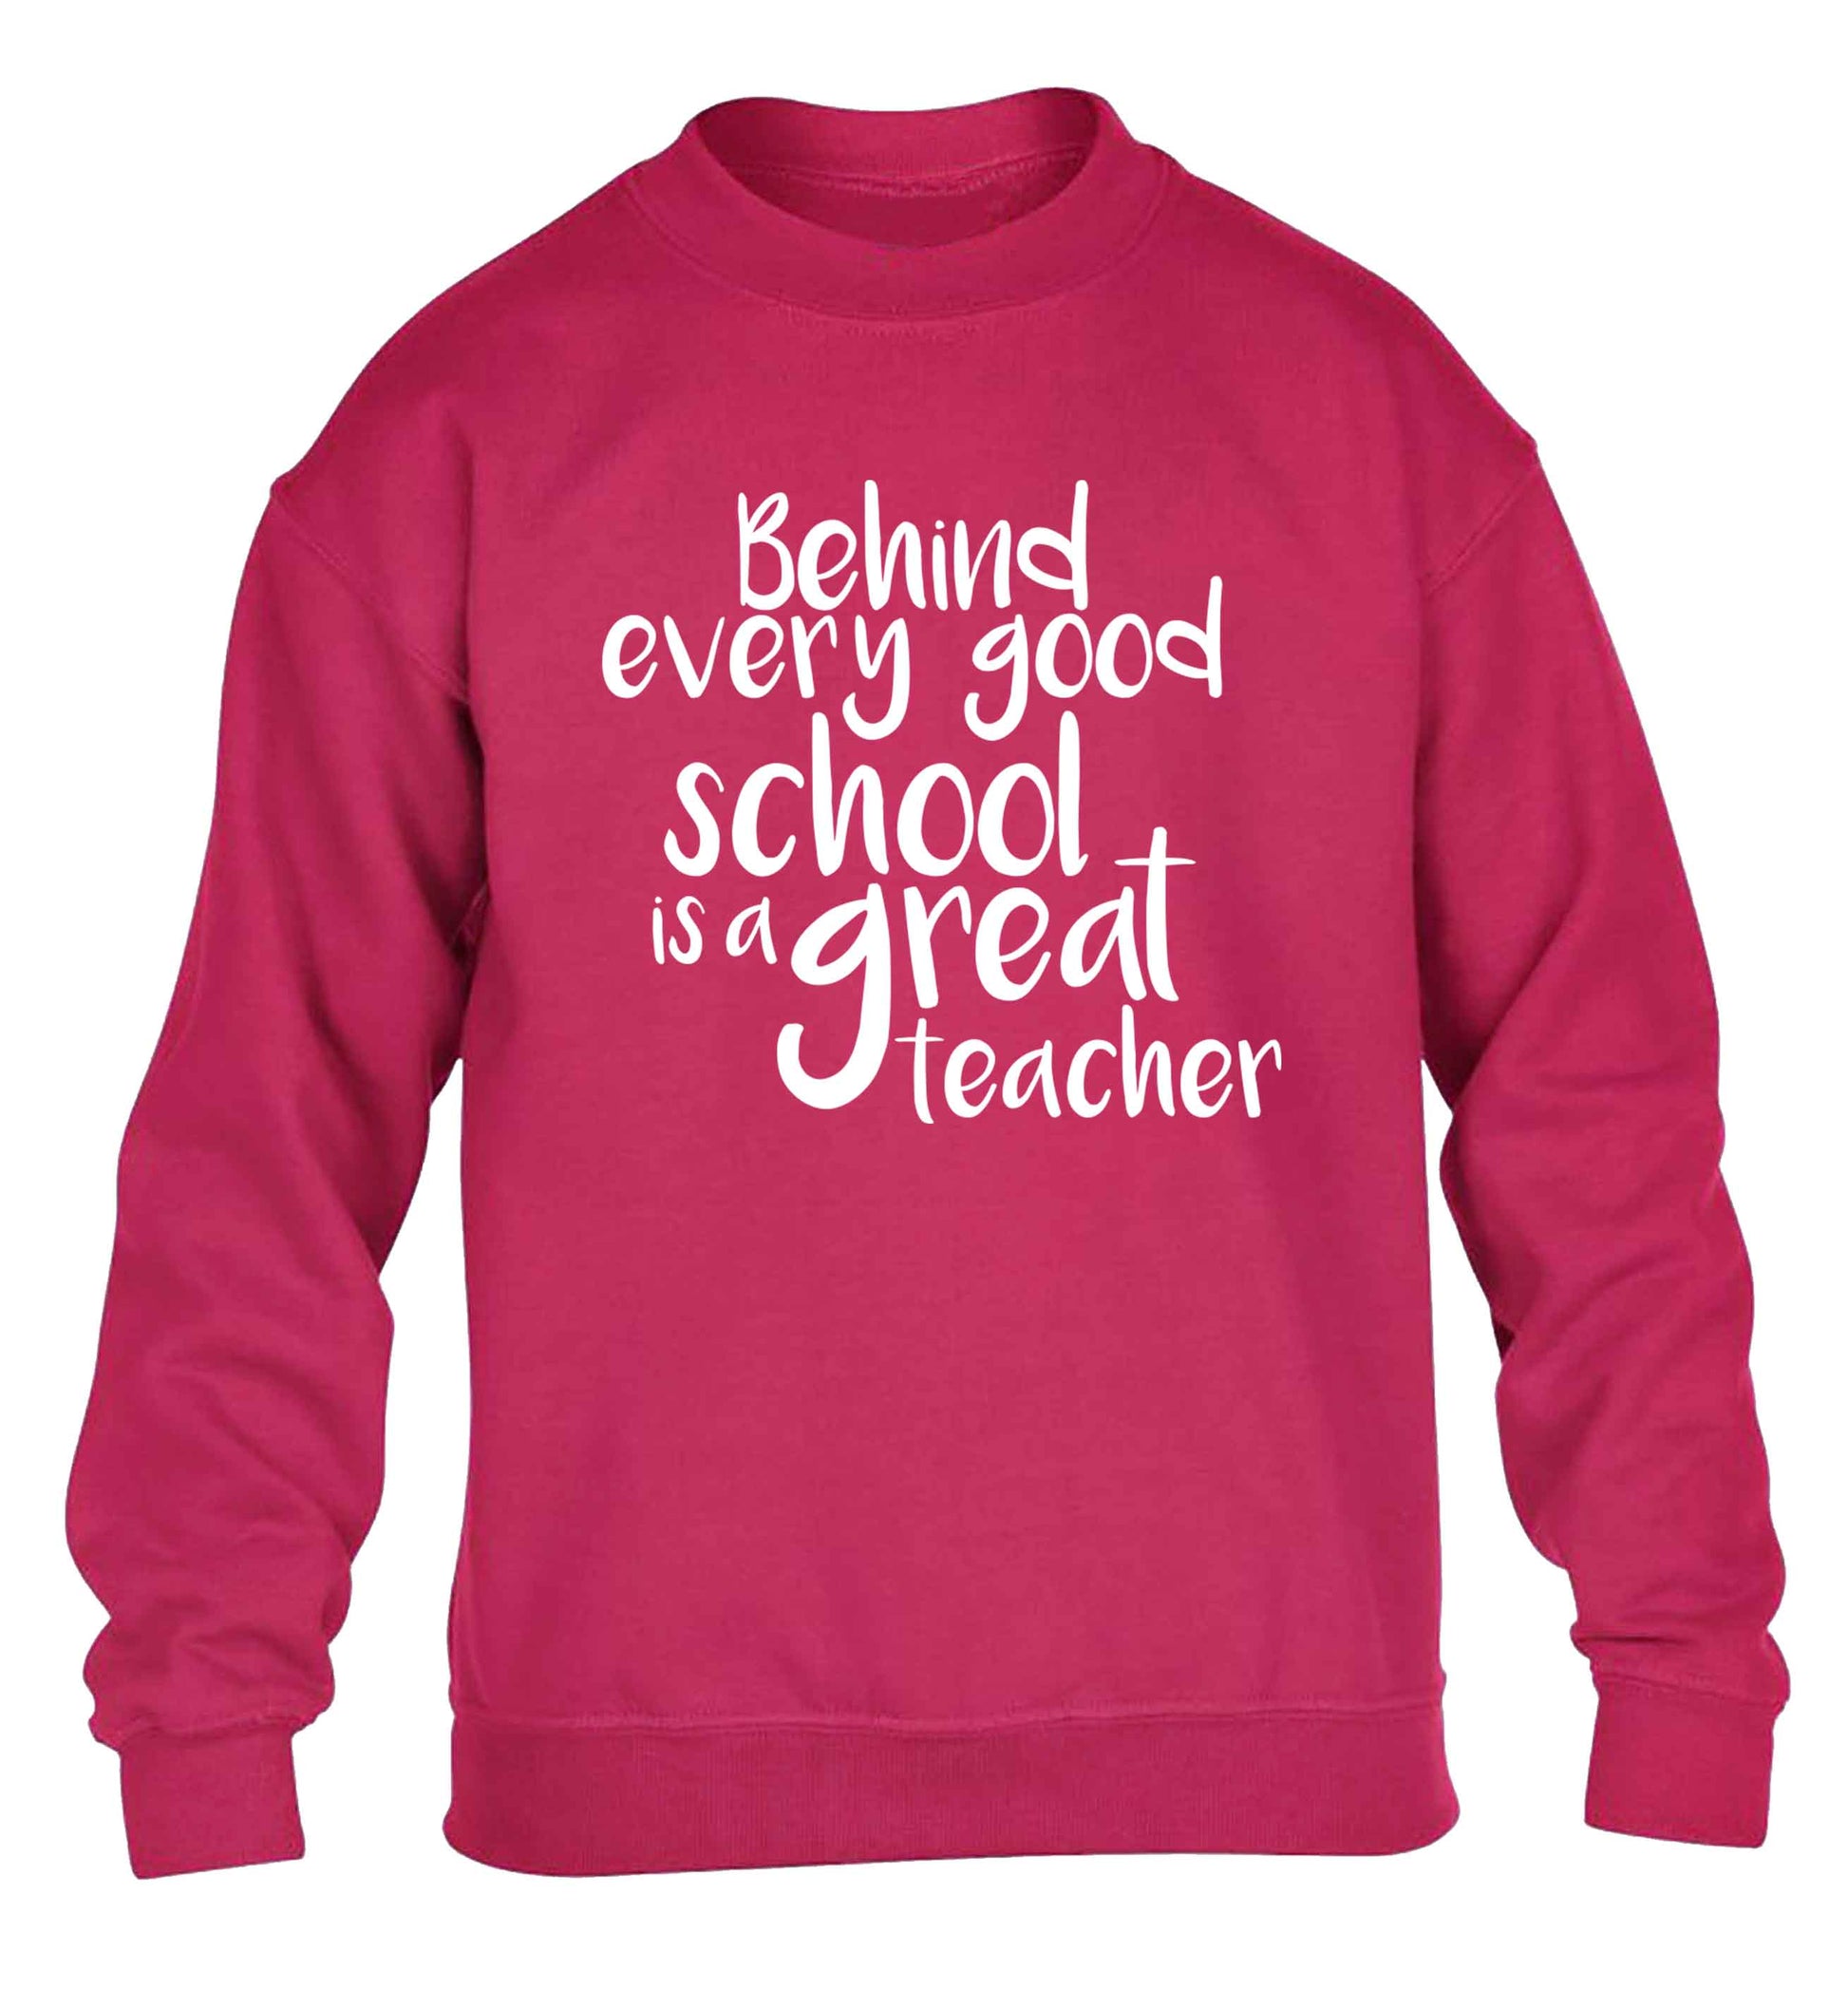 Behind every good school is a great teacher children's pink sweater 12-13 Years